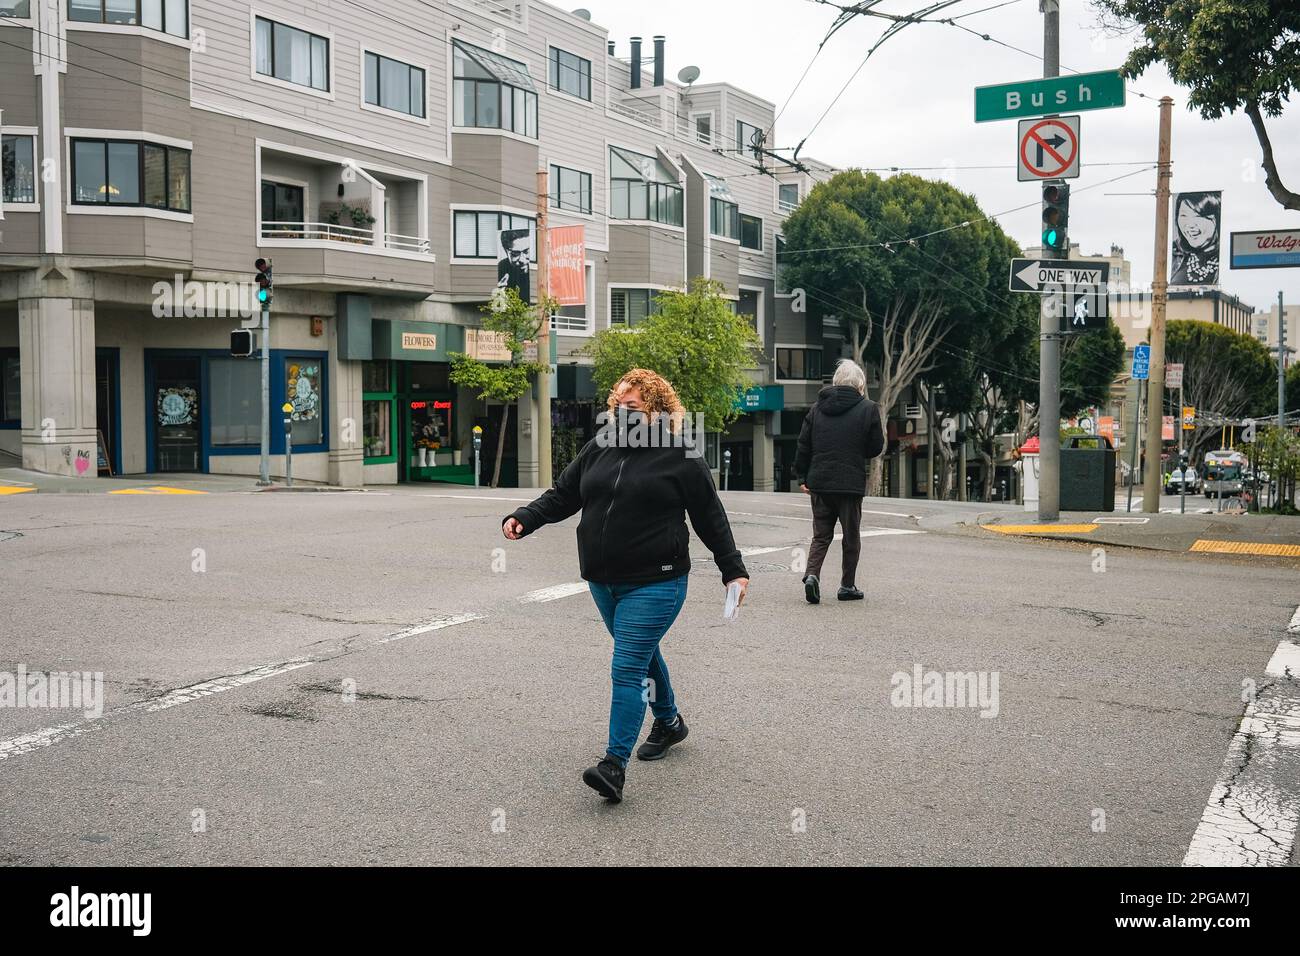 https://c8.alamy.com/comp/2PGAM7J/people-stroll-down-buchanan-street-with-the-colorful-shops-and-restaurants-of-japantown-in-the-background-san-franciscos-japantown-is-a-vibrant-and-historic-neighborhood-with-a-rich-cultural-heritage-that-draws-visitors-from-all-over-the-world-from-its-beautiful-gardens-and-unique-shops-to-its-delicious-food-and-lively-festivals-japantown-is-a-must-visit-destination-for-anyone-interested-in-exploring-the-citys-diverse-and-fascinating-culture-located-just-a-few-blocks-from-union-square-japantown-is-a-bustling-enclave-that-has-been-a-hub-of-japanese-american-life-in-san-francisco-for-ov-2PGAM7J.jpg